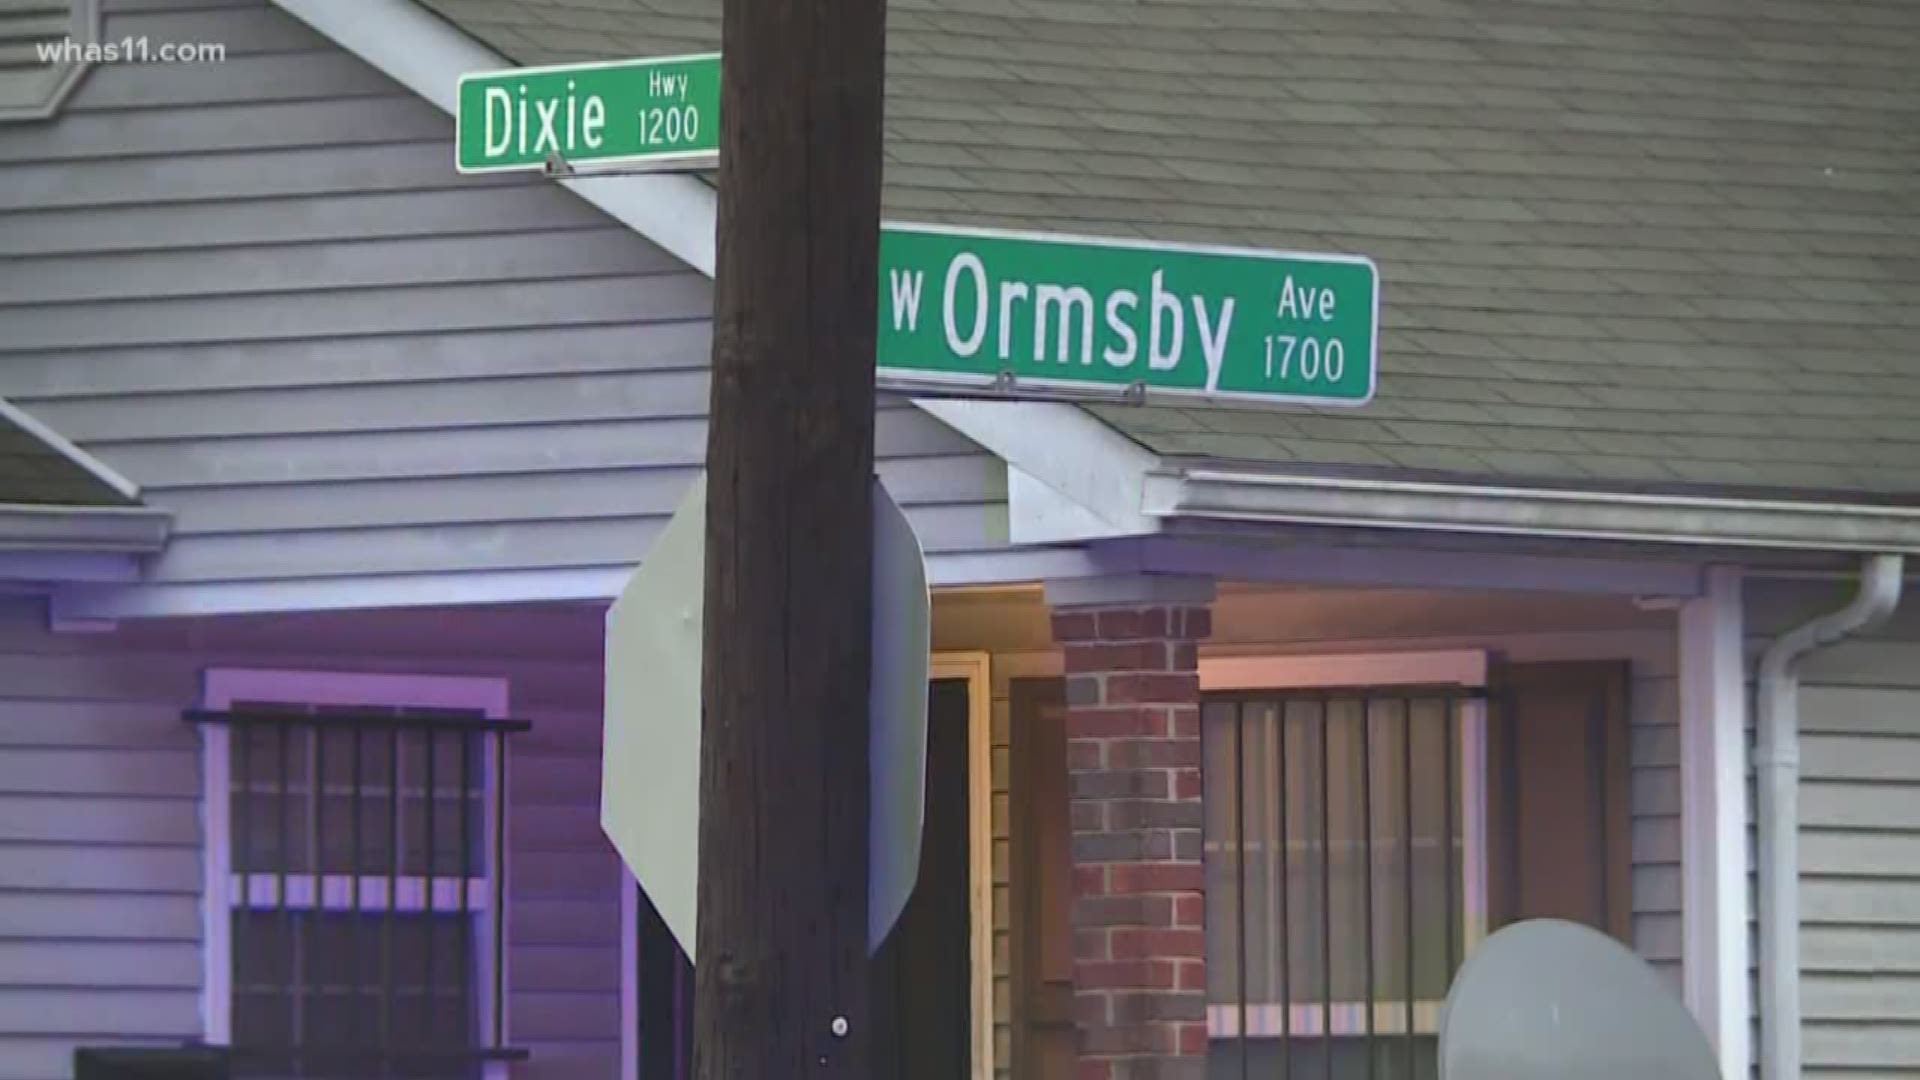 Police are investigating a series of separate shootings across Louisville that left one person dead and 9 others injured.